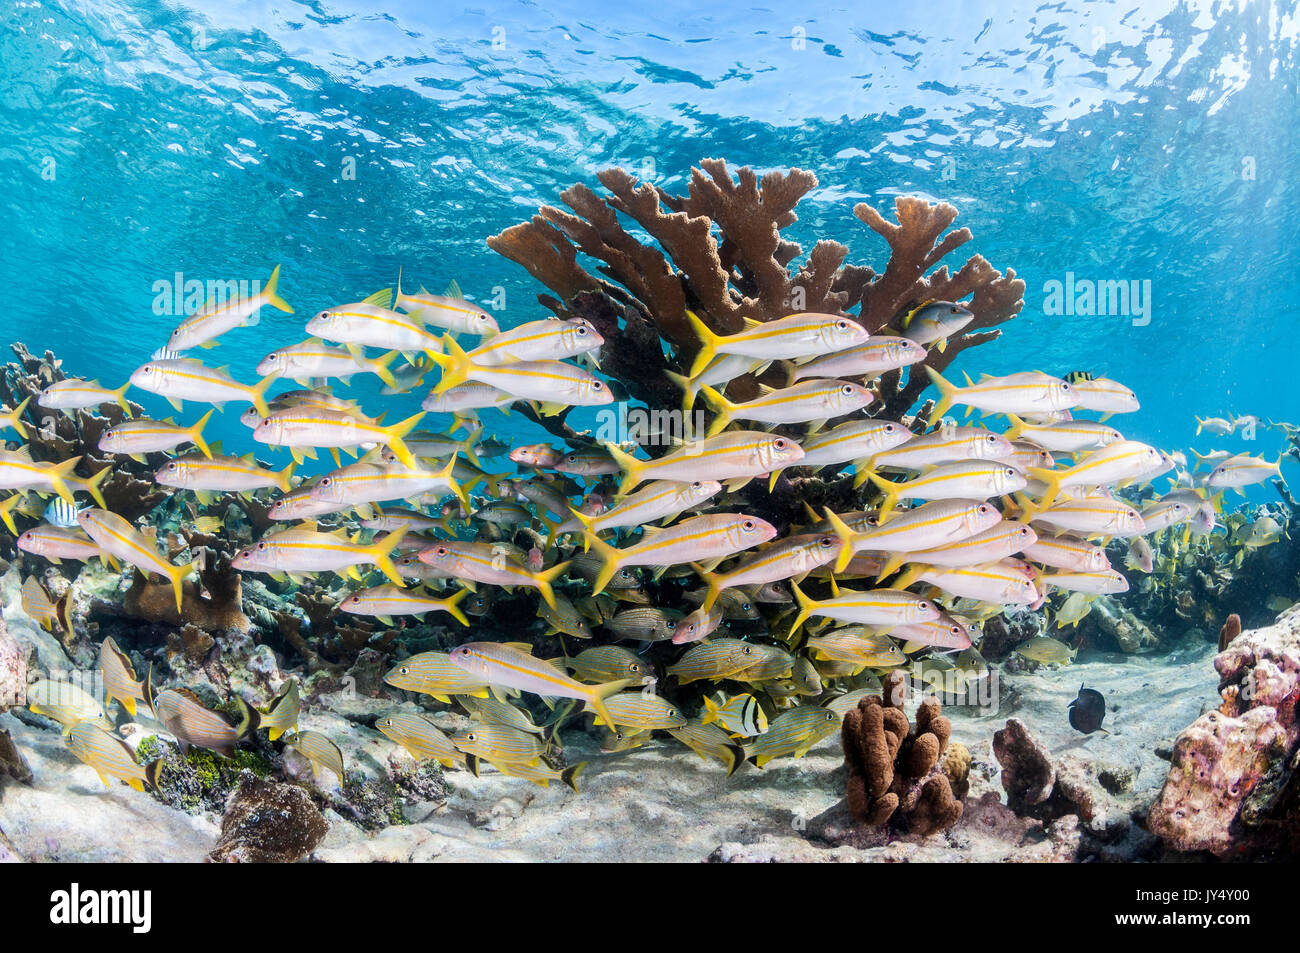 Underwater reef scene showing hard corals and schools of tropical fish in shallow water, Gardens of the Queens, Cuba. Stock Photo